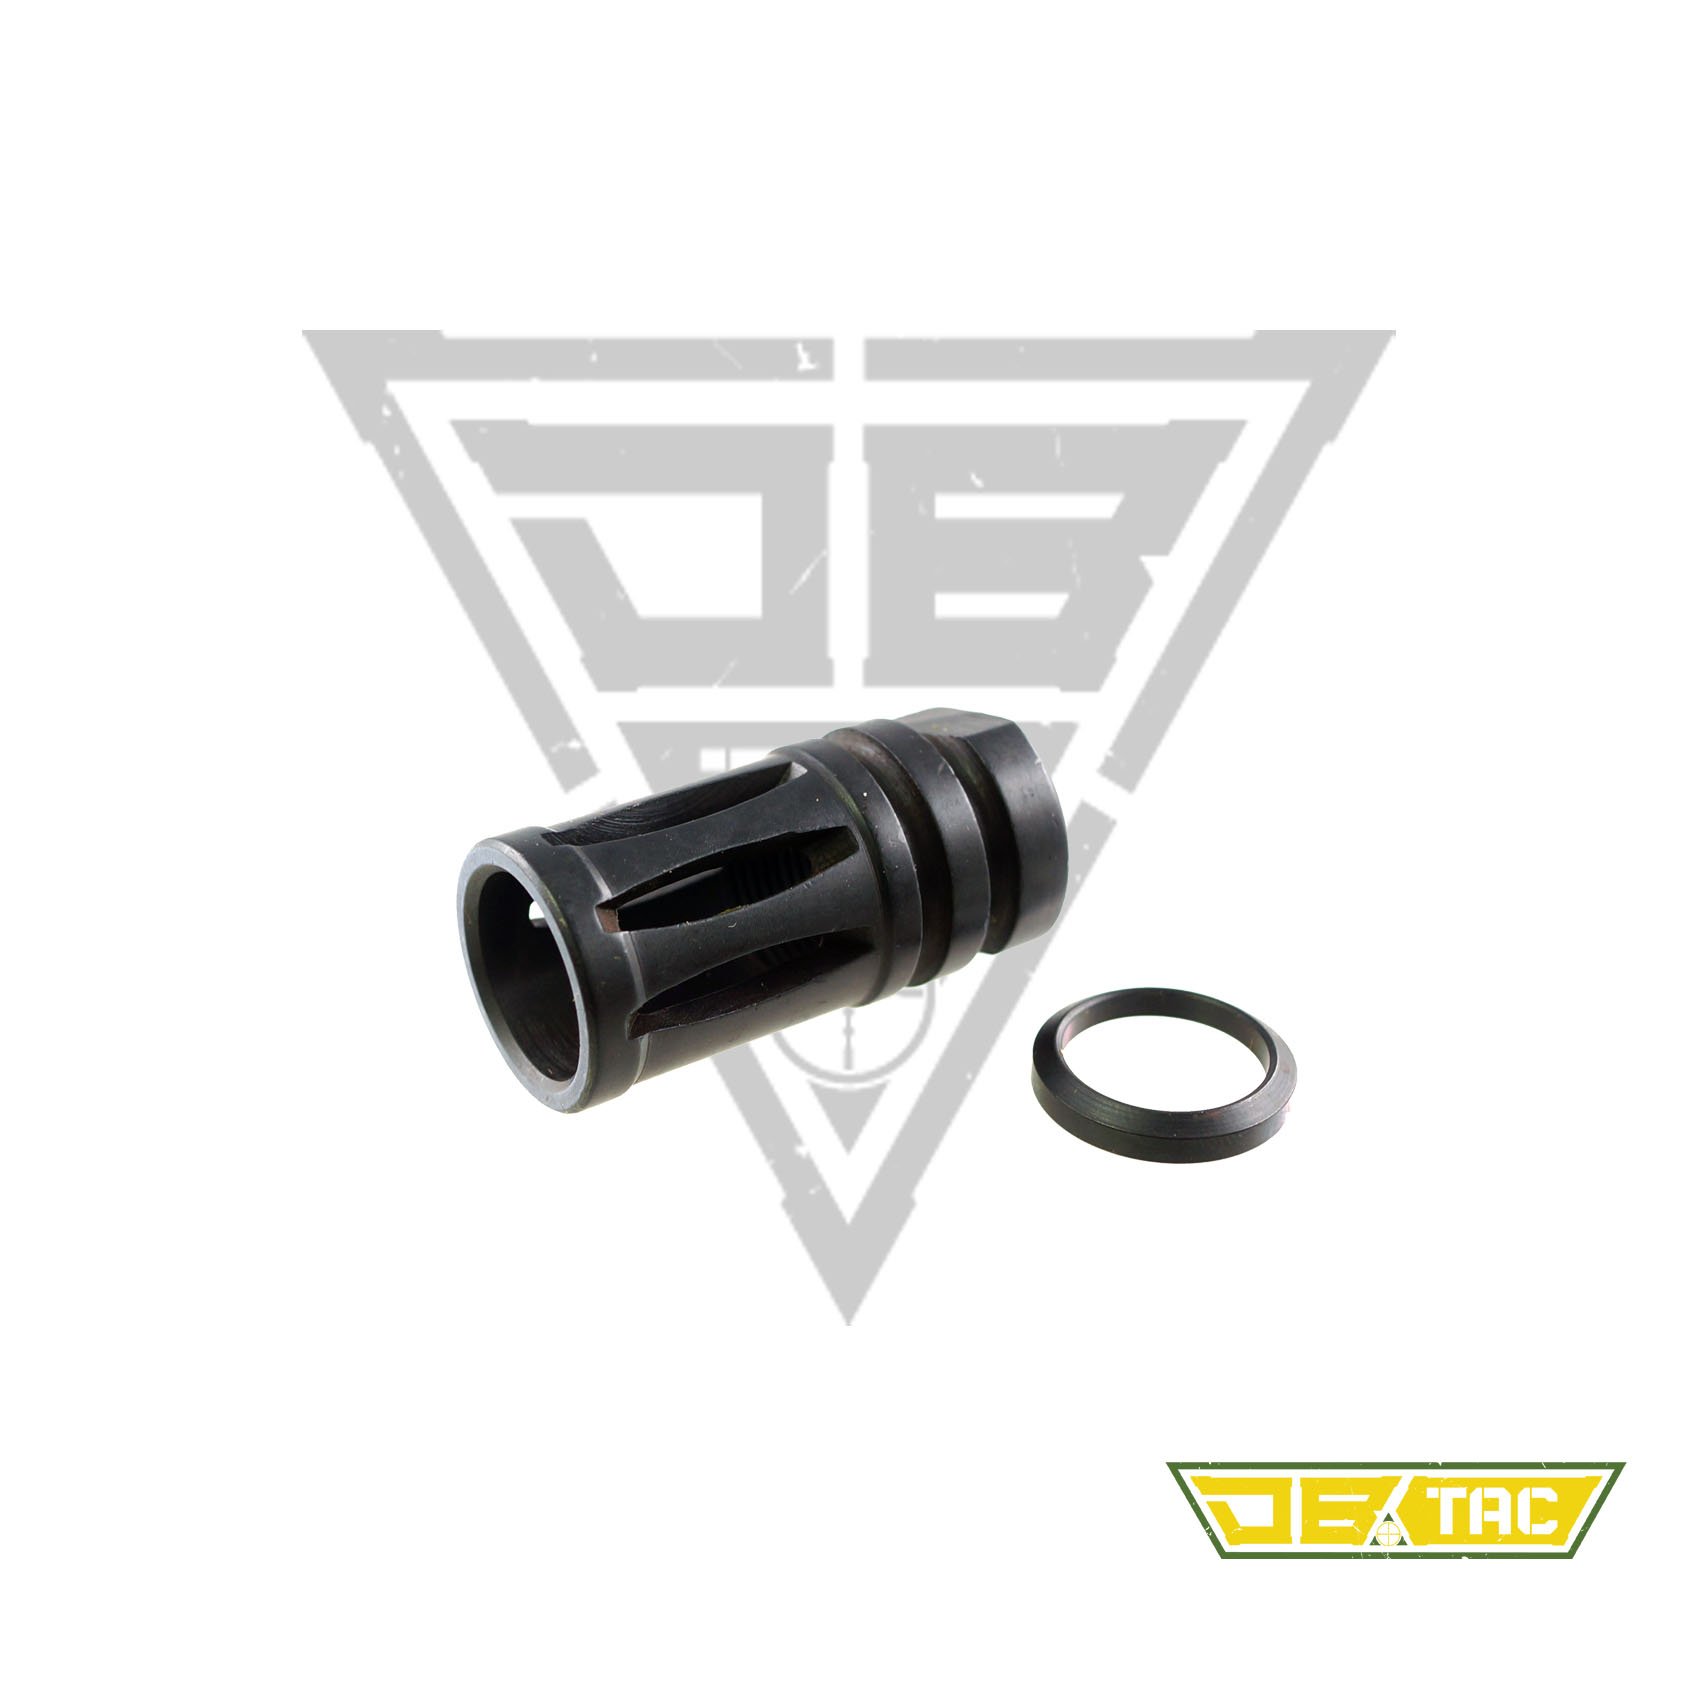 1//2-28 Thread Muzzle Brake With Free Crush Washer For .223//5.56